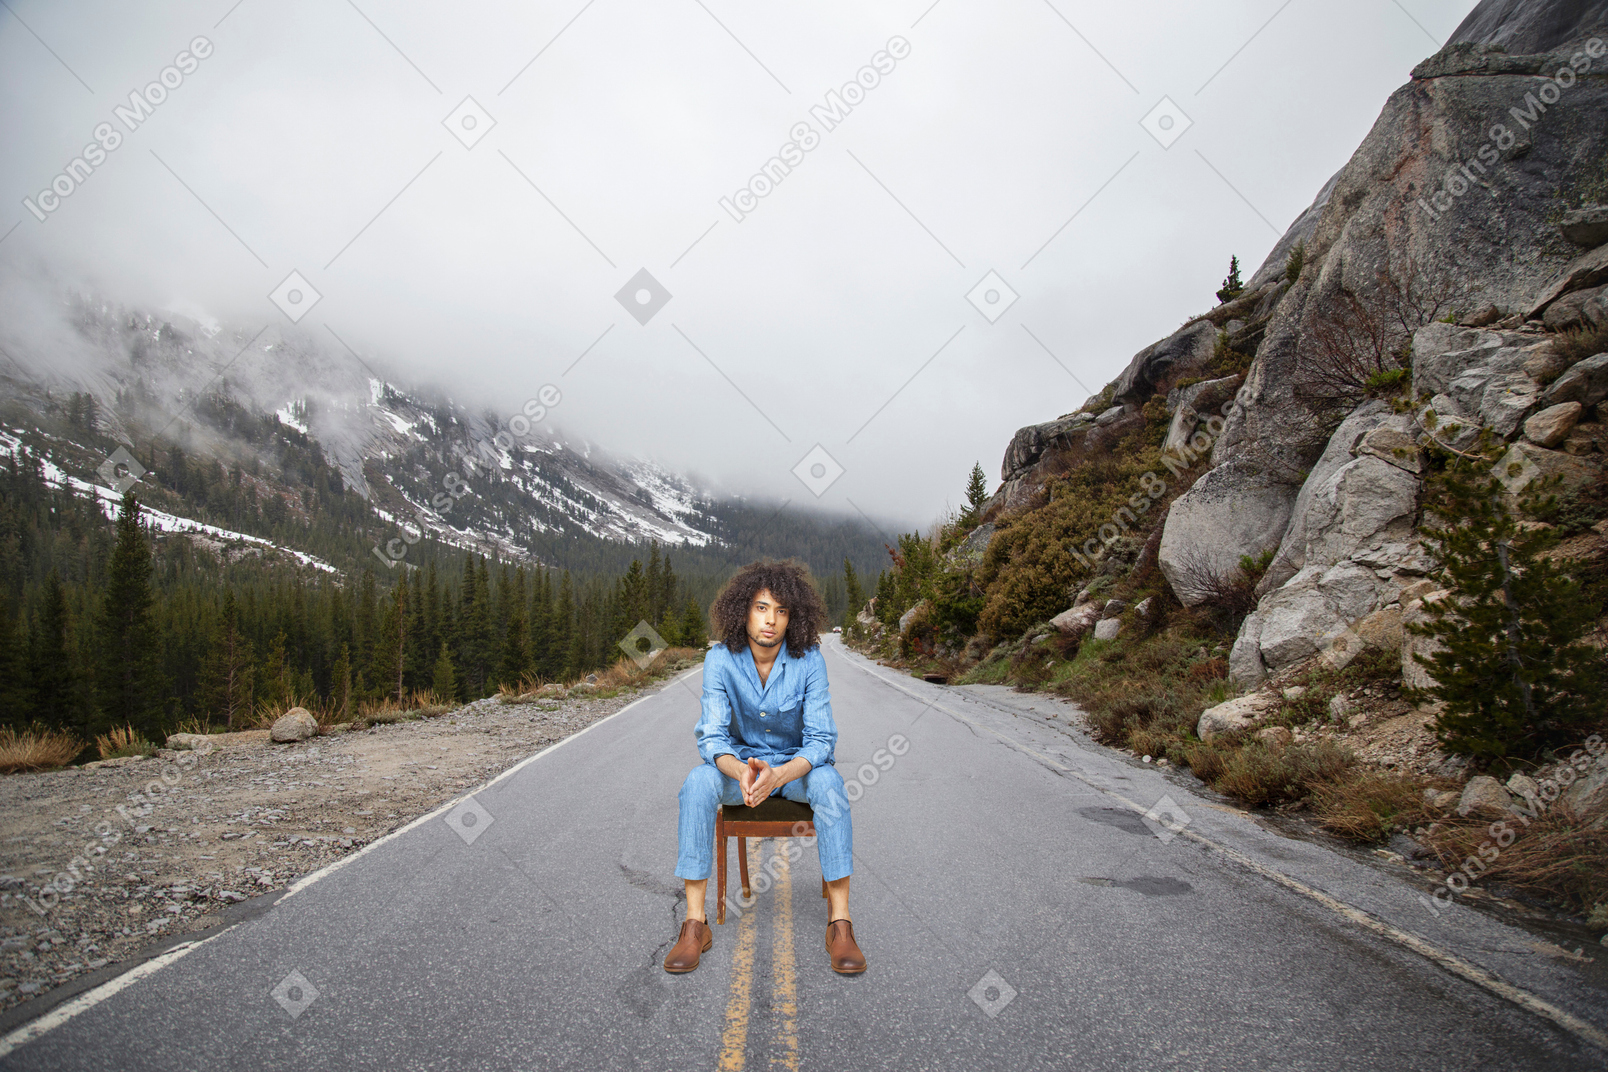 Man sitting on a chair in the mountains